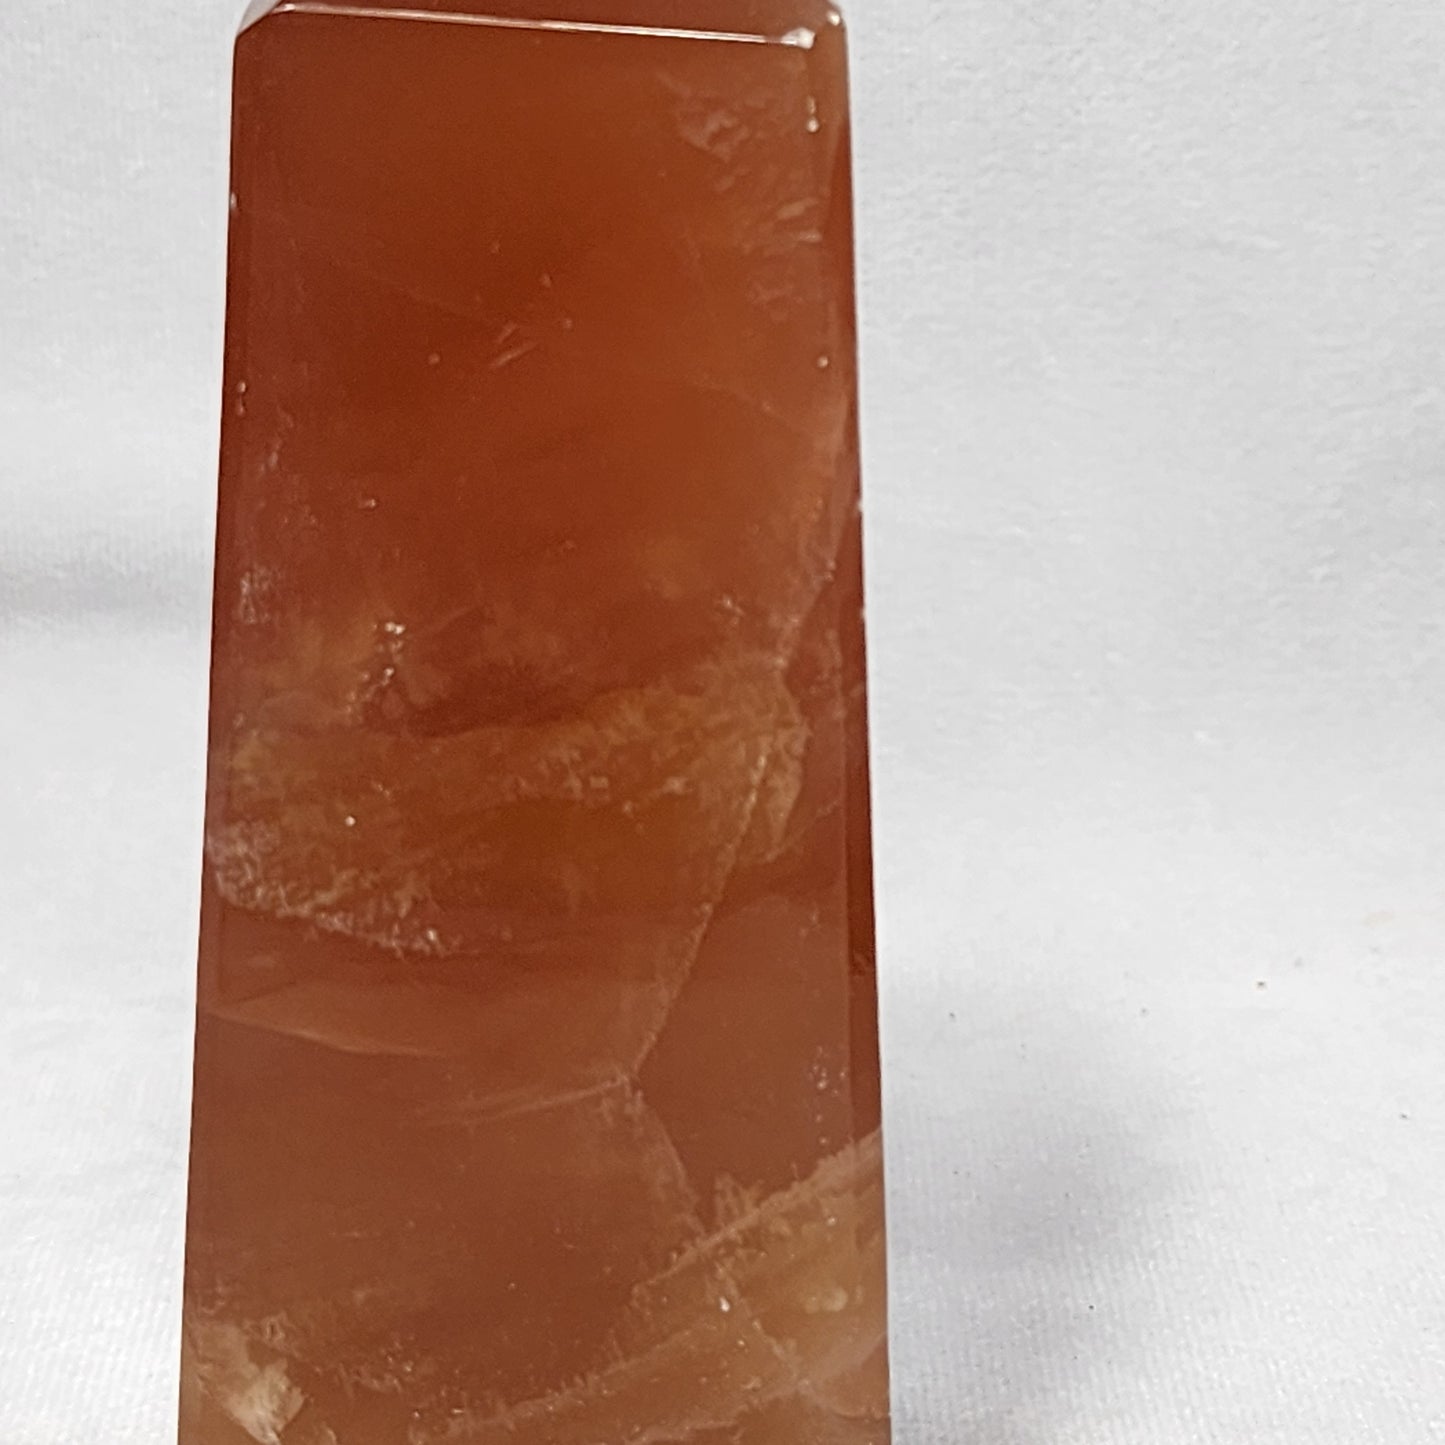 Gorgeous Calcite Tower